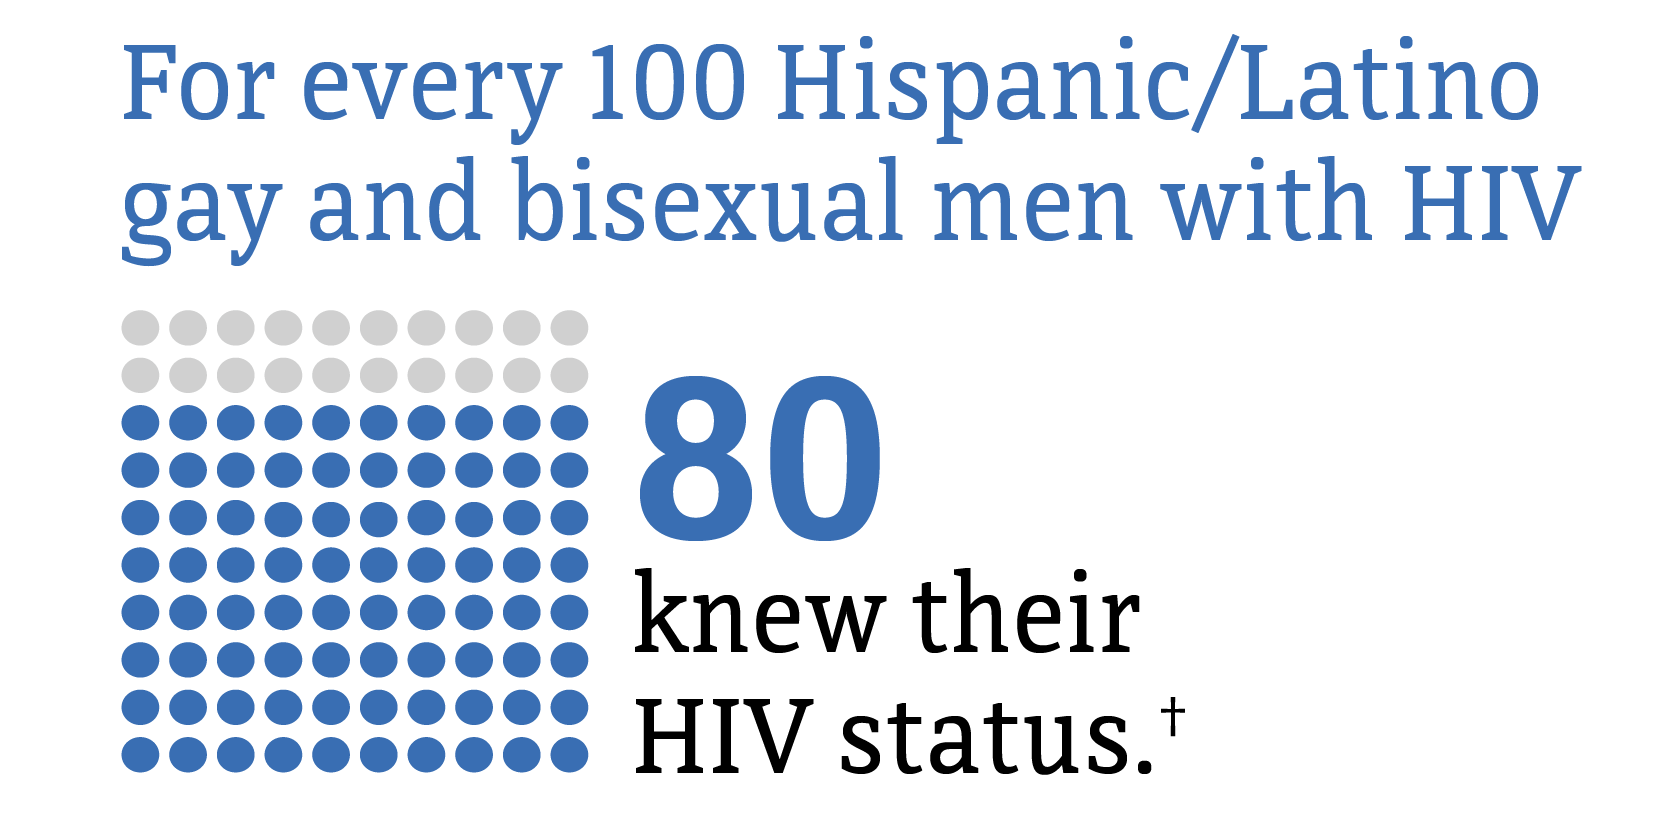 This chart shows in 2019, for every 100 Hispanic/Latino gay and bisexual men with HIV, 80 knew their HIV status.